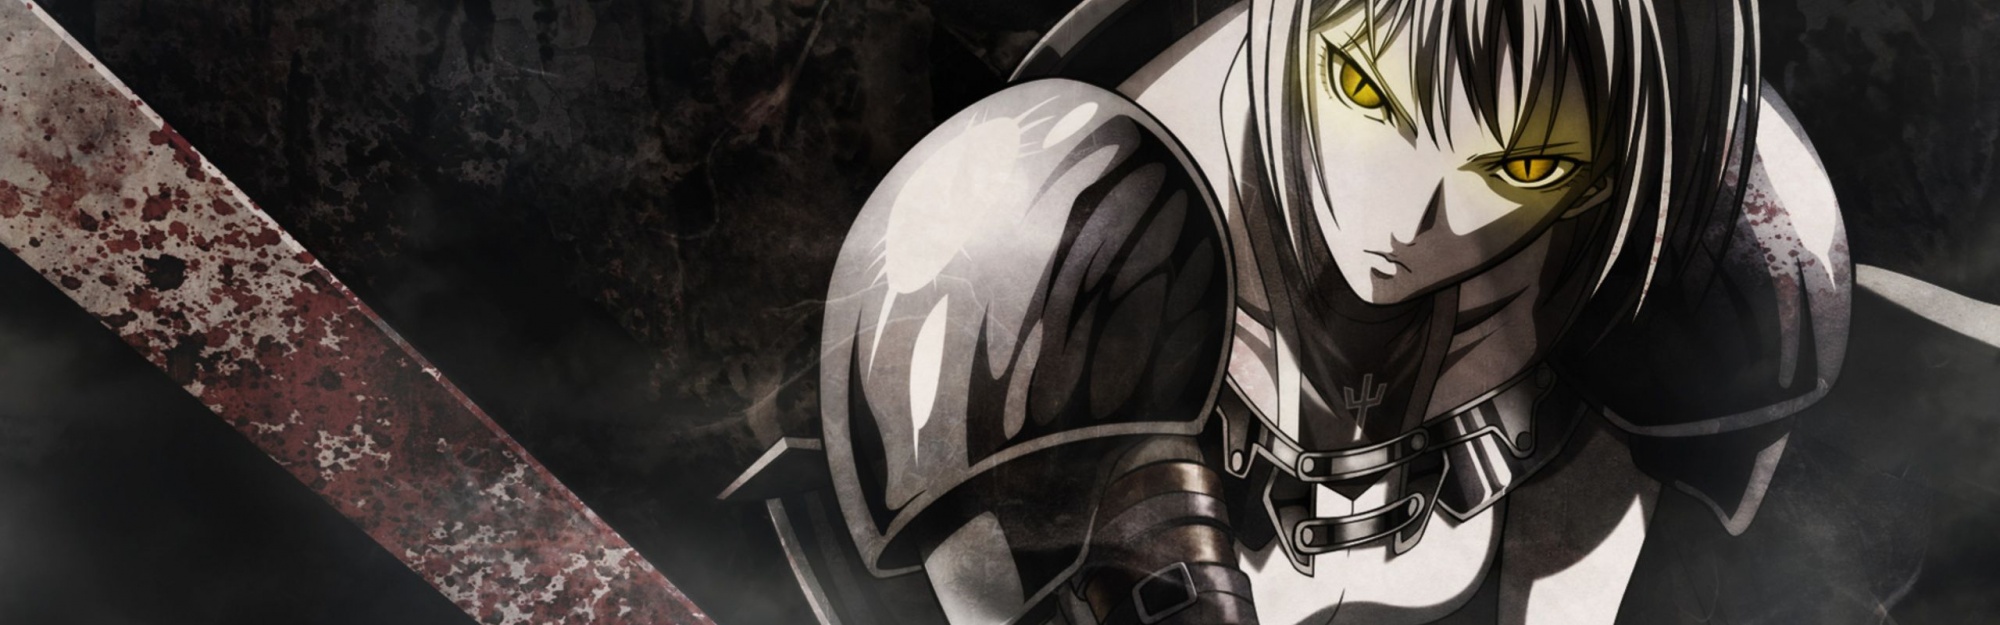 Claymore Anime Background